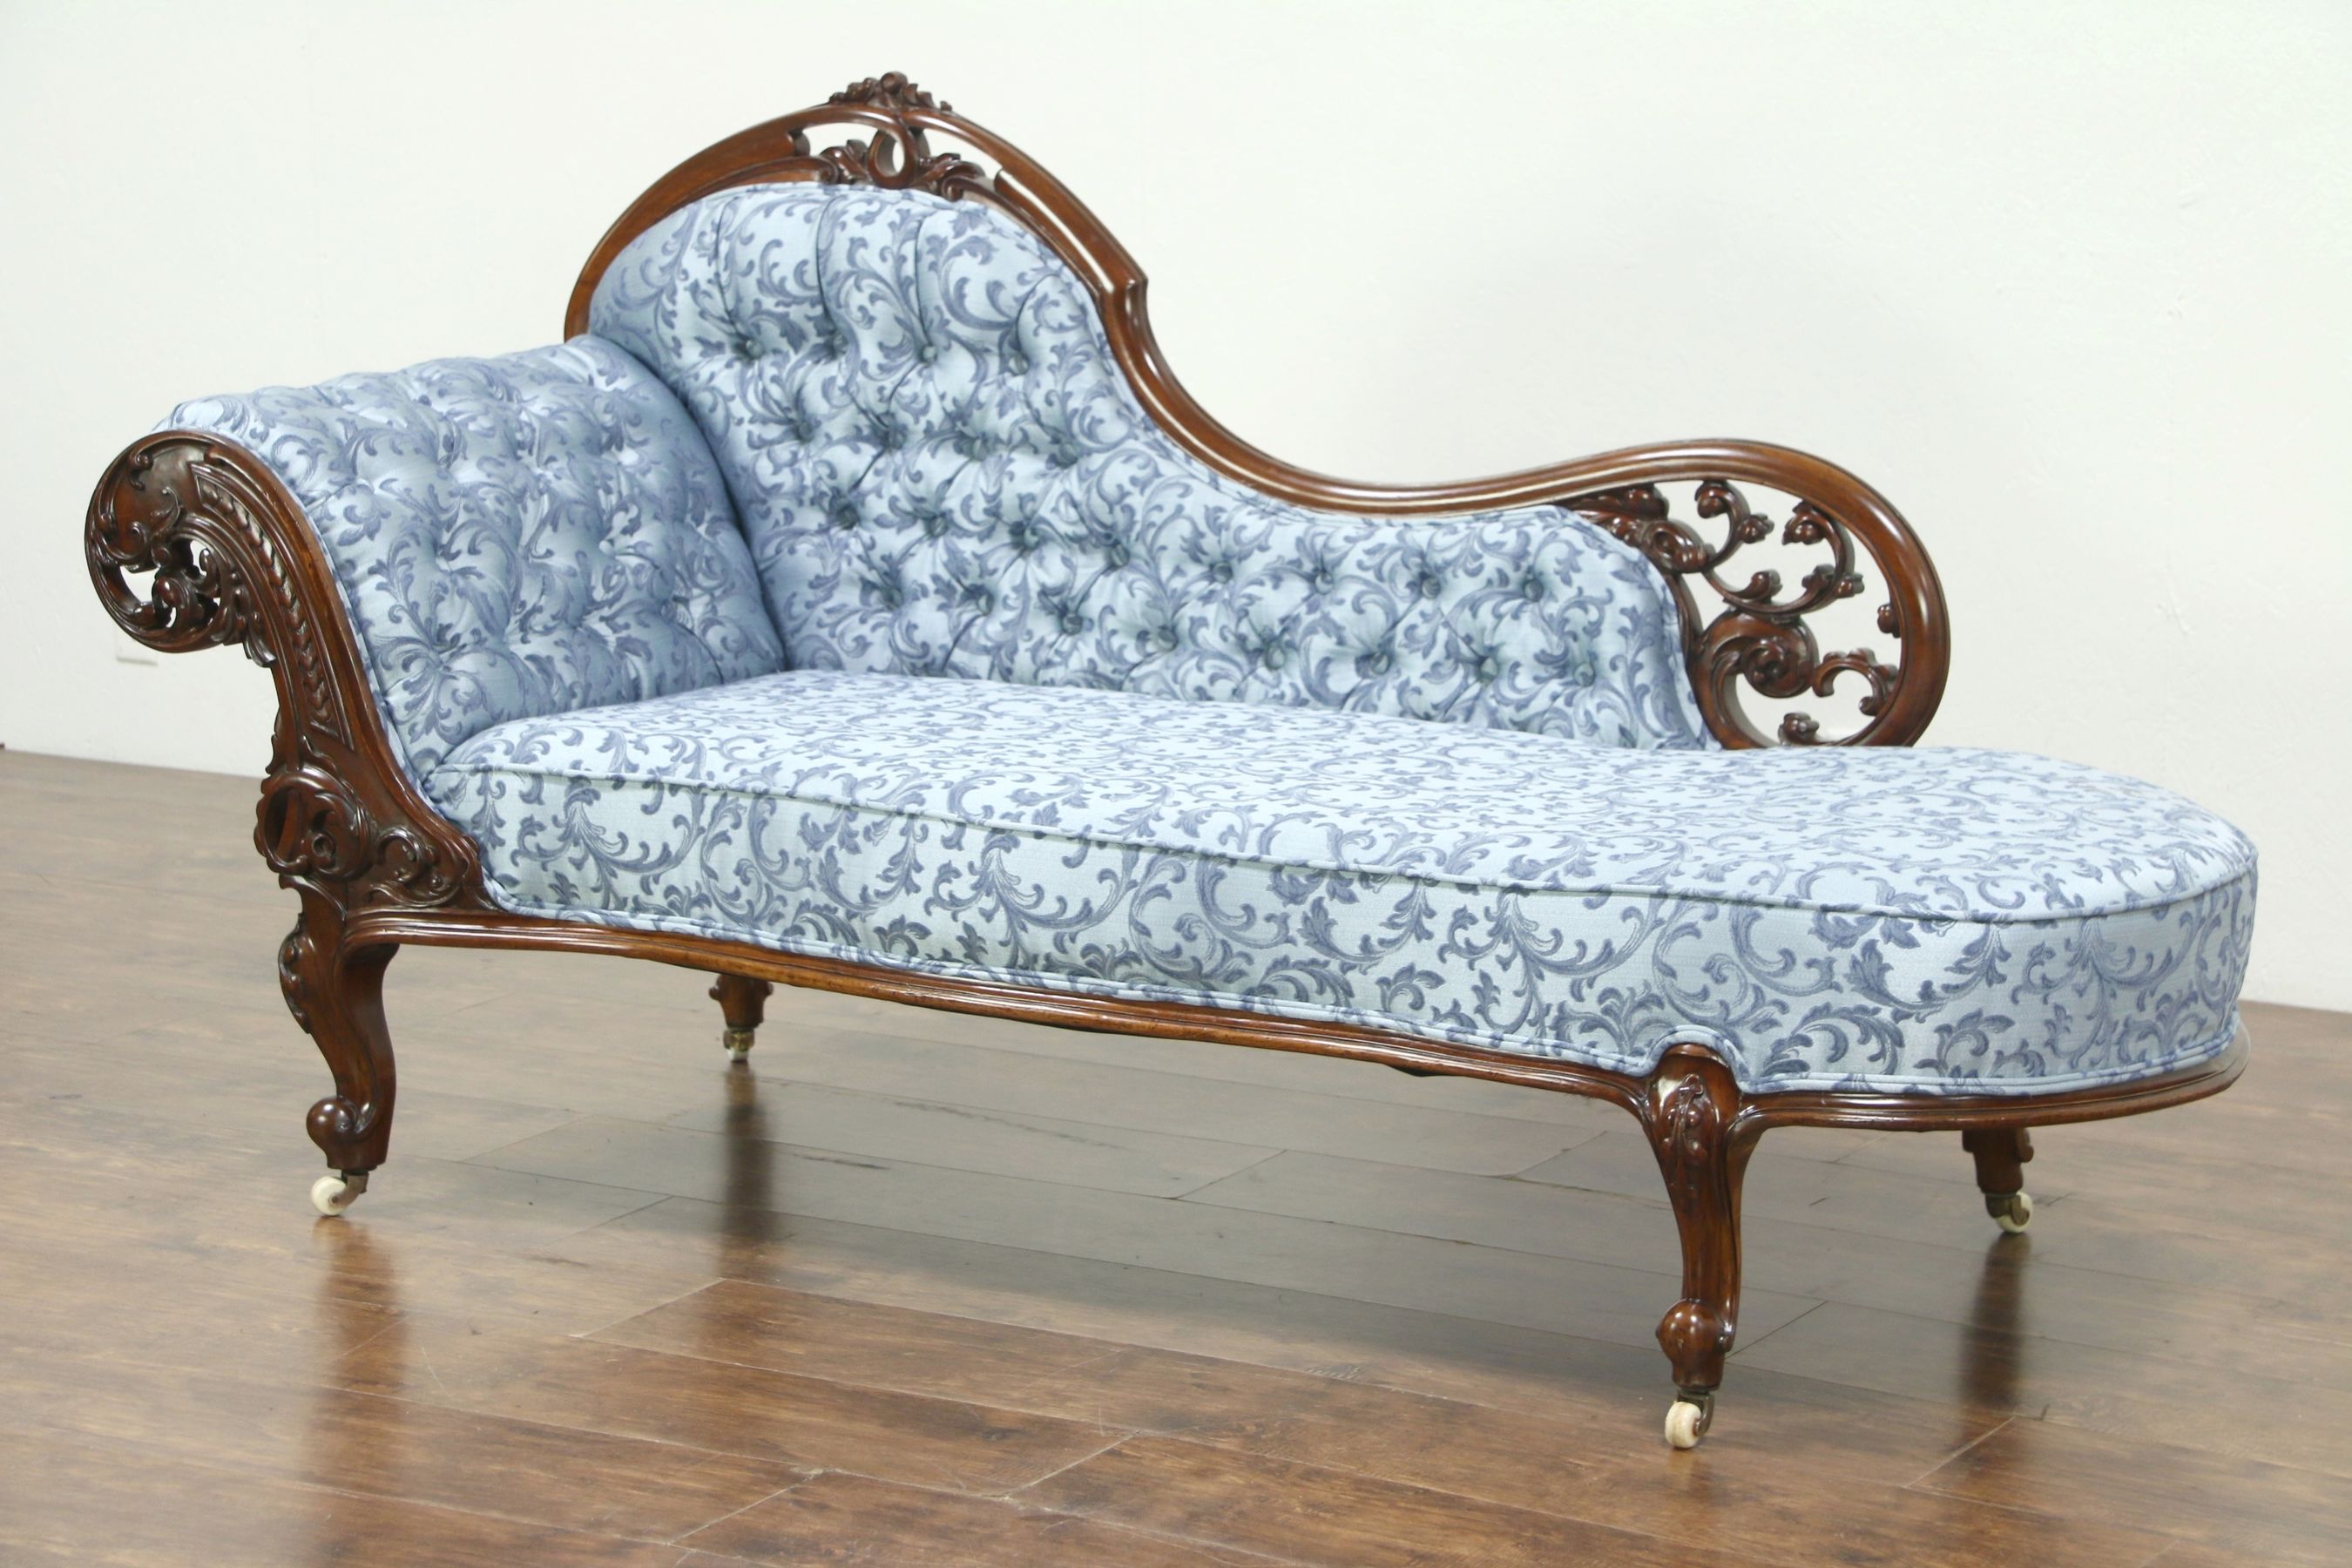 SOLD - Carved Mahogany Antique Recamier, Chaise or Fainting Couch, England  #28747 - Harp Gallery